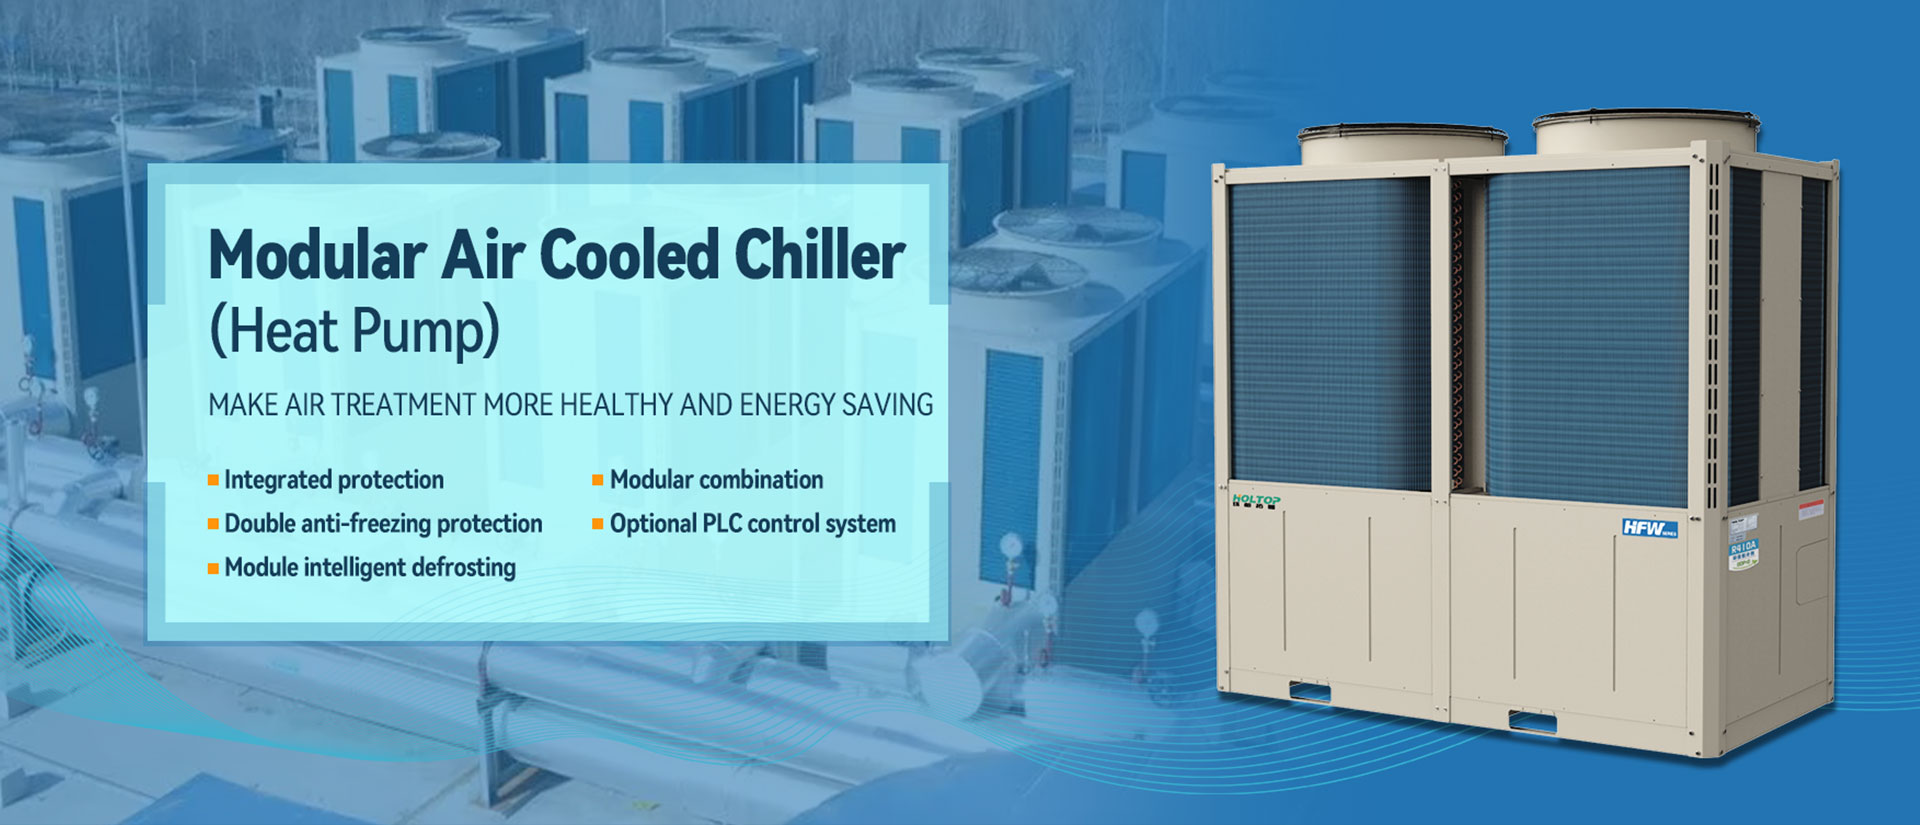 Airwoods MODULAR AIR COOLED CHILLER WITH HEAT PUMP